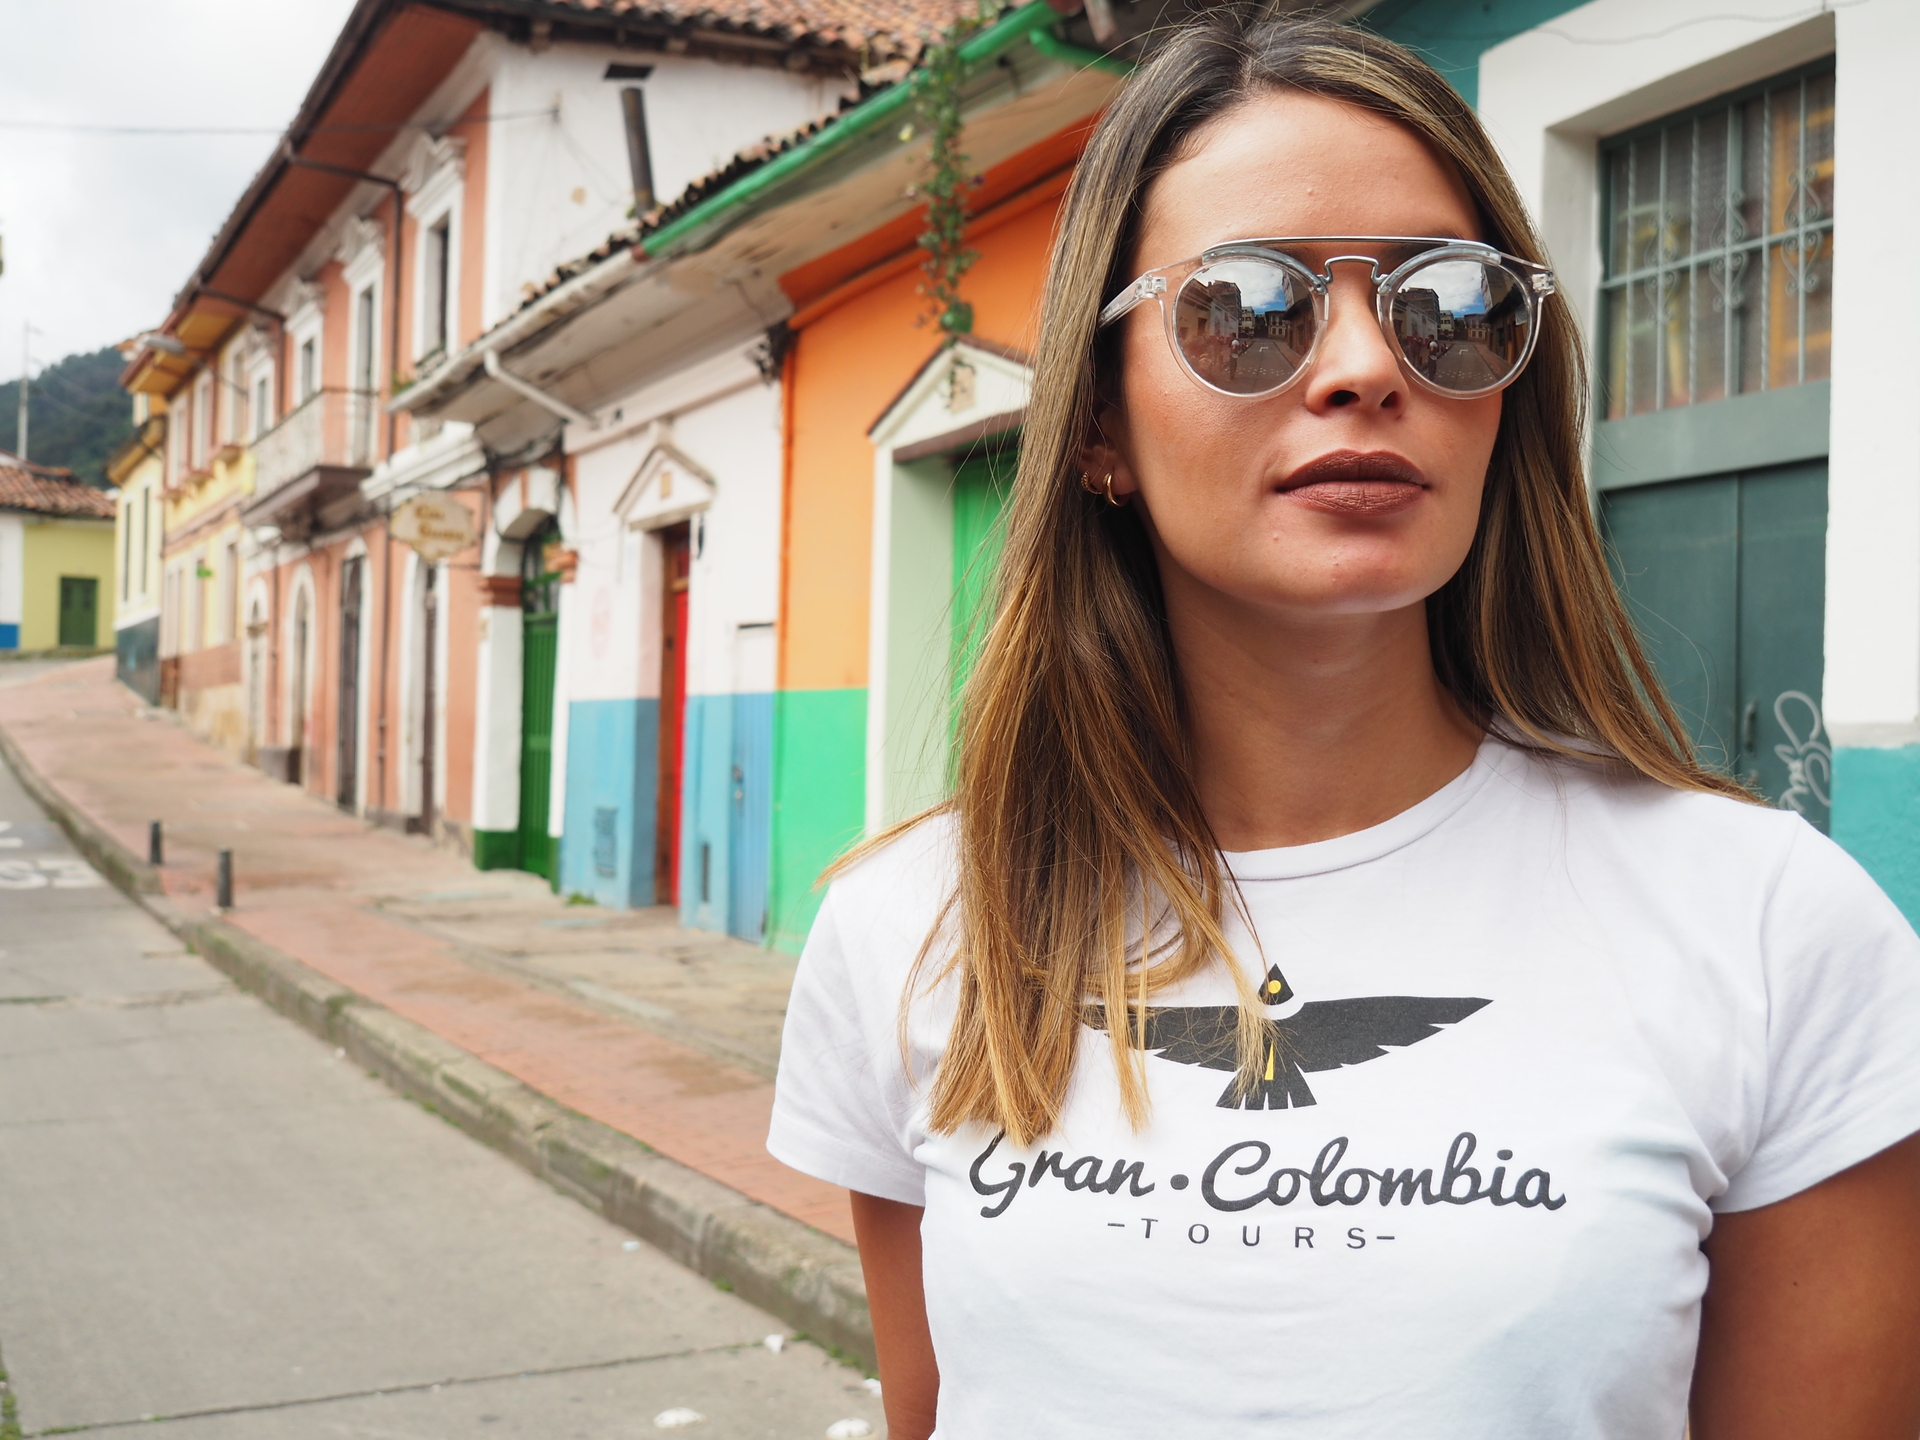 Gran Colombia Tours Payment Link